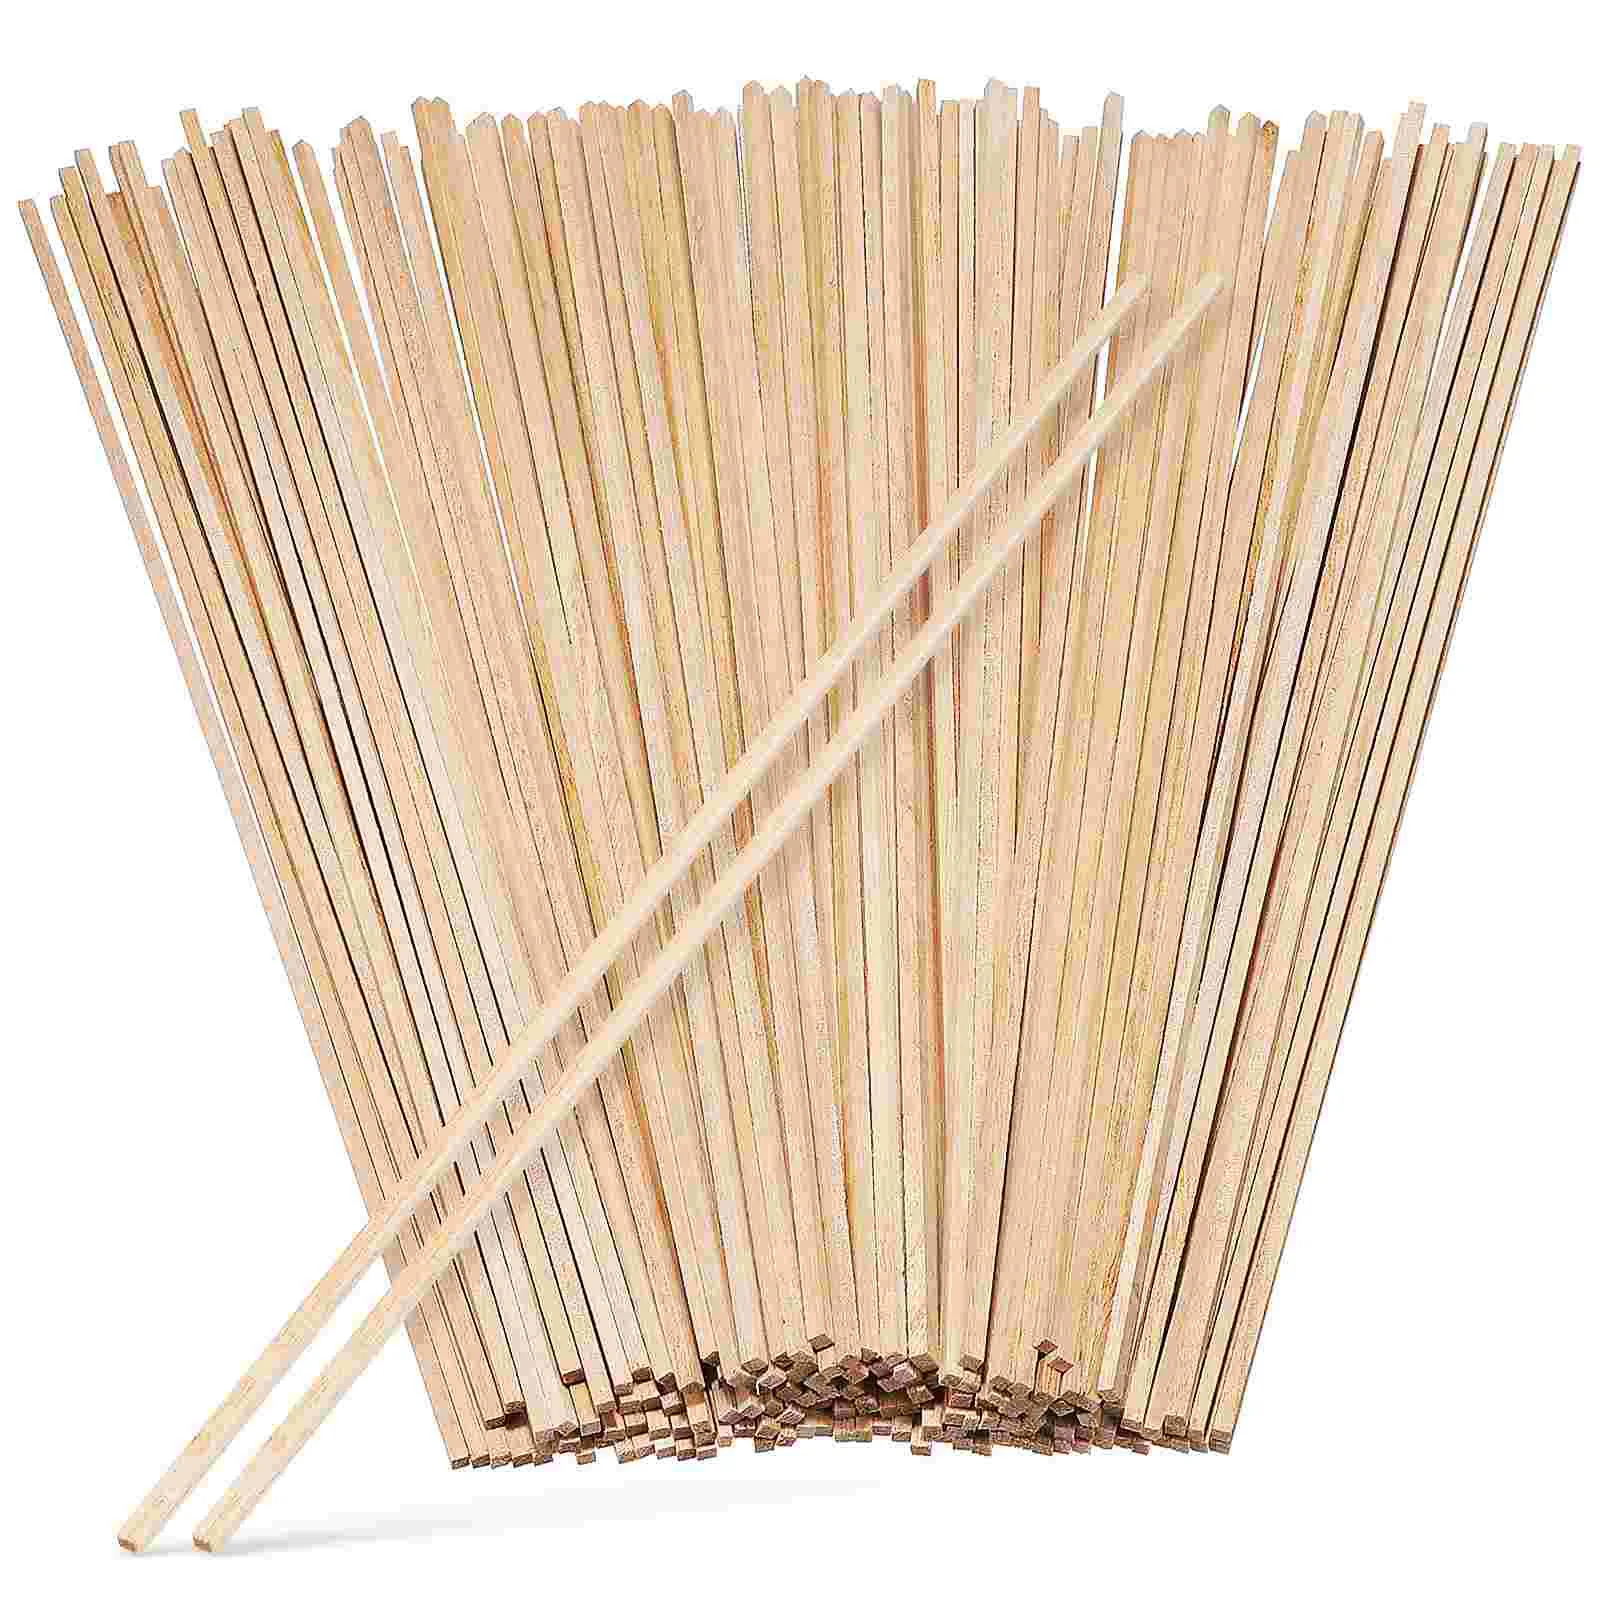 

100 Pcs Dowel Rods Unfinished Wood Sticks Wooden Craft Crafting Manual Dowels Strips